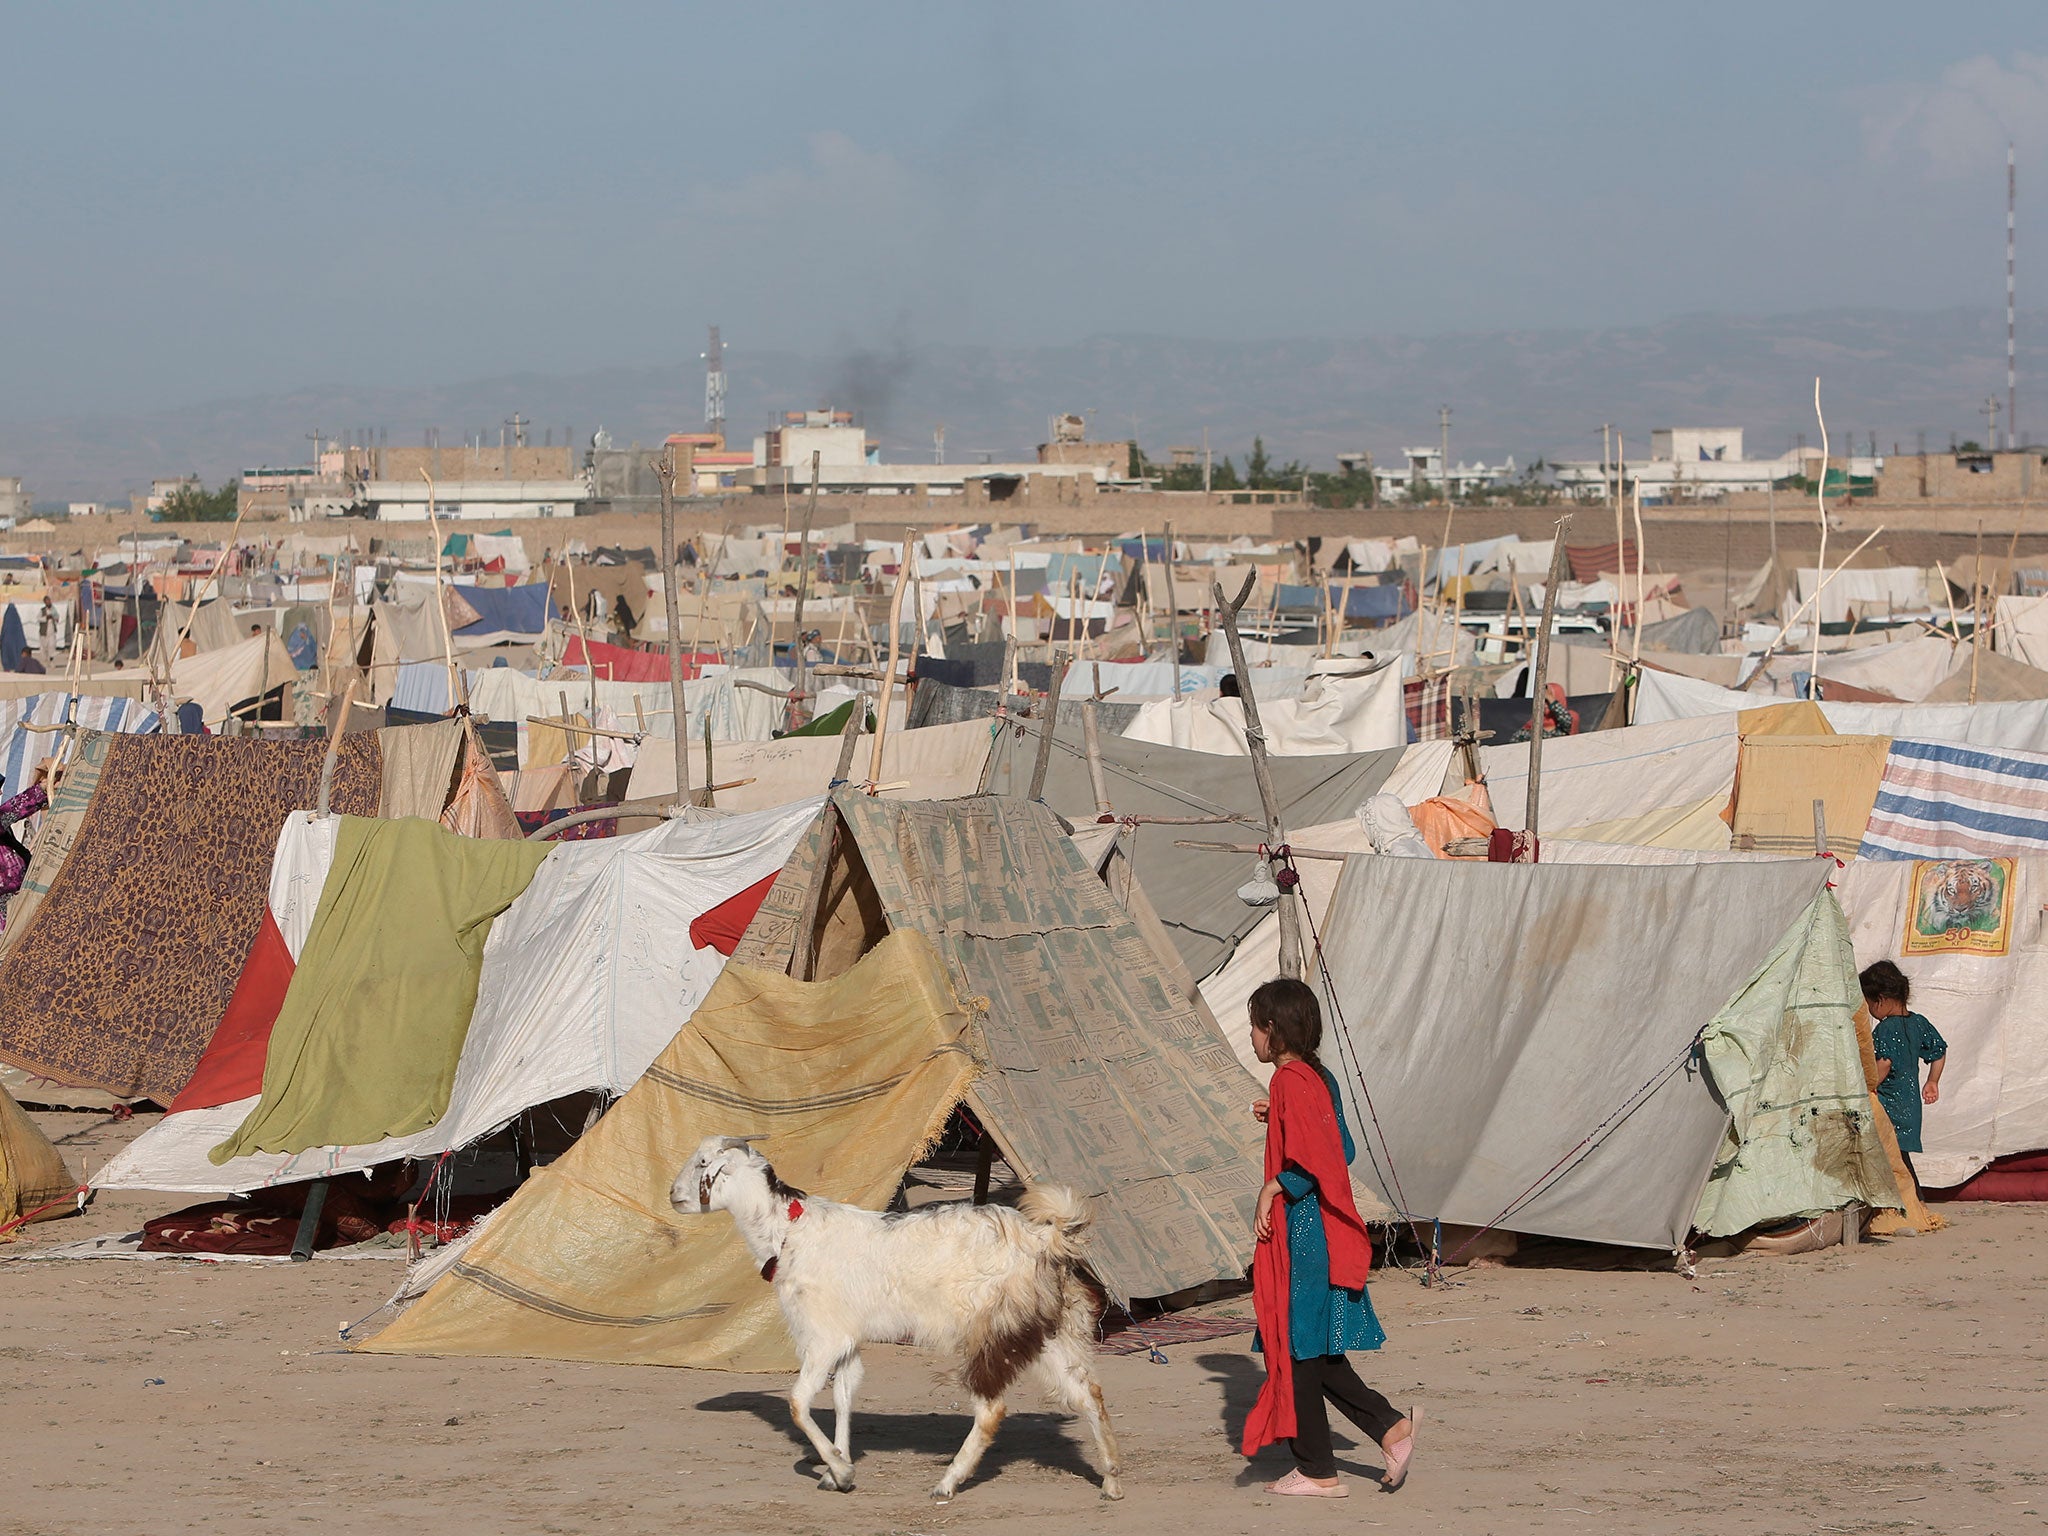 An Afghan girl walks among the multiplying tents at a refugee camp in Kunduz province, north of Kabul